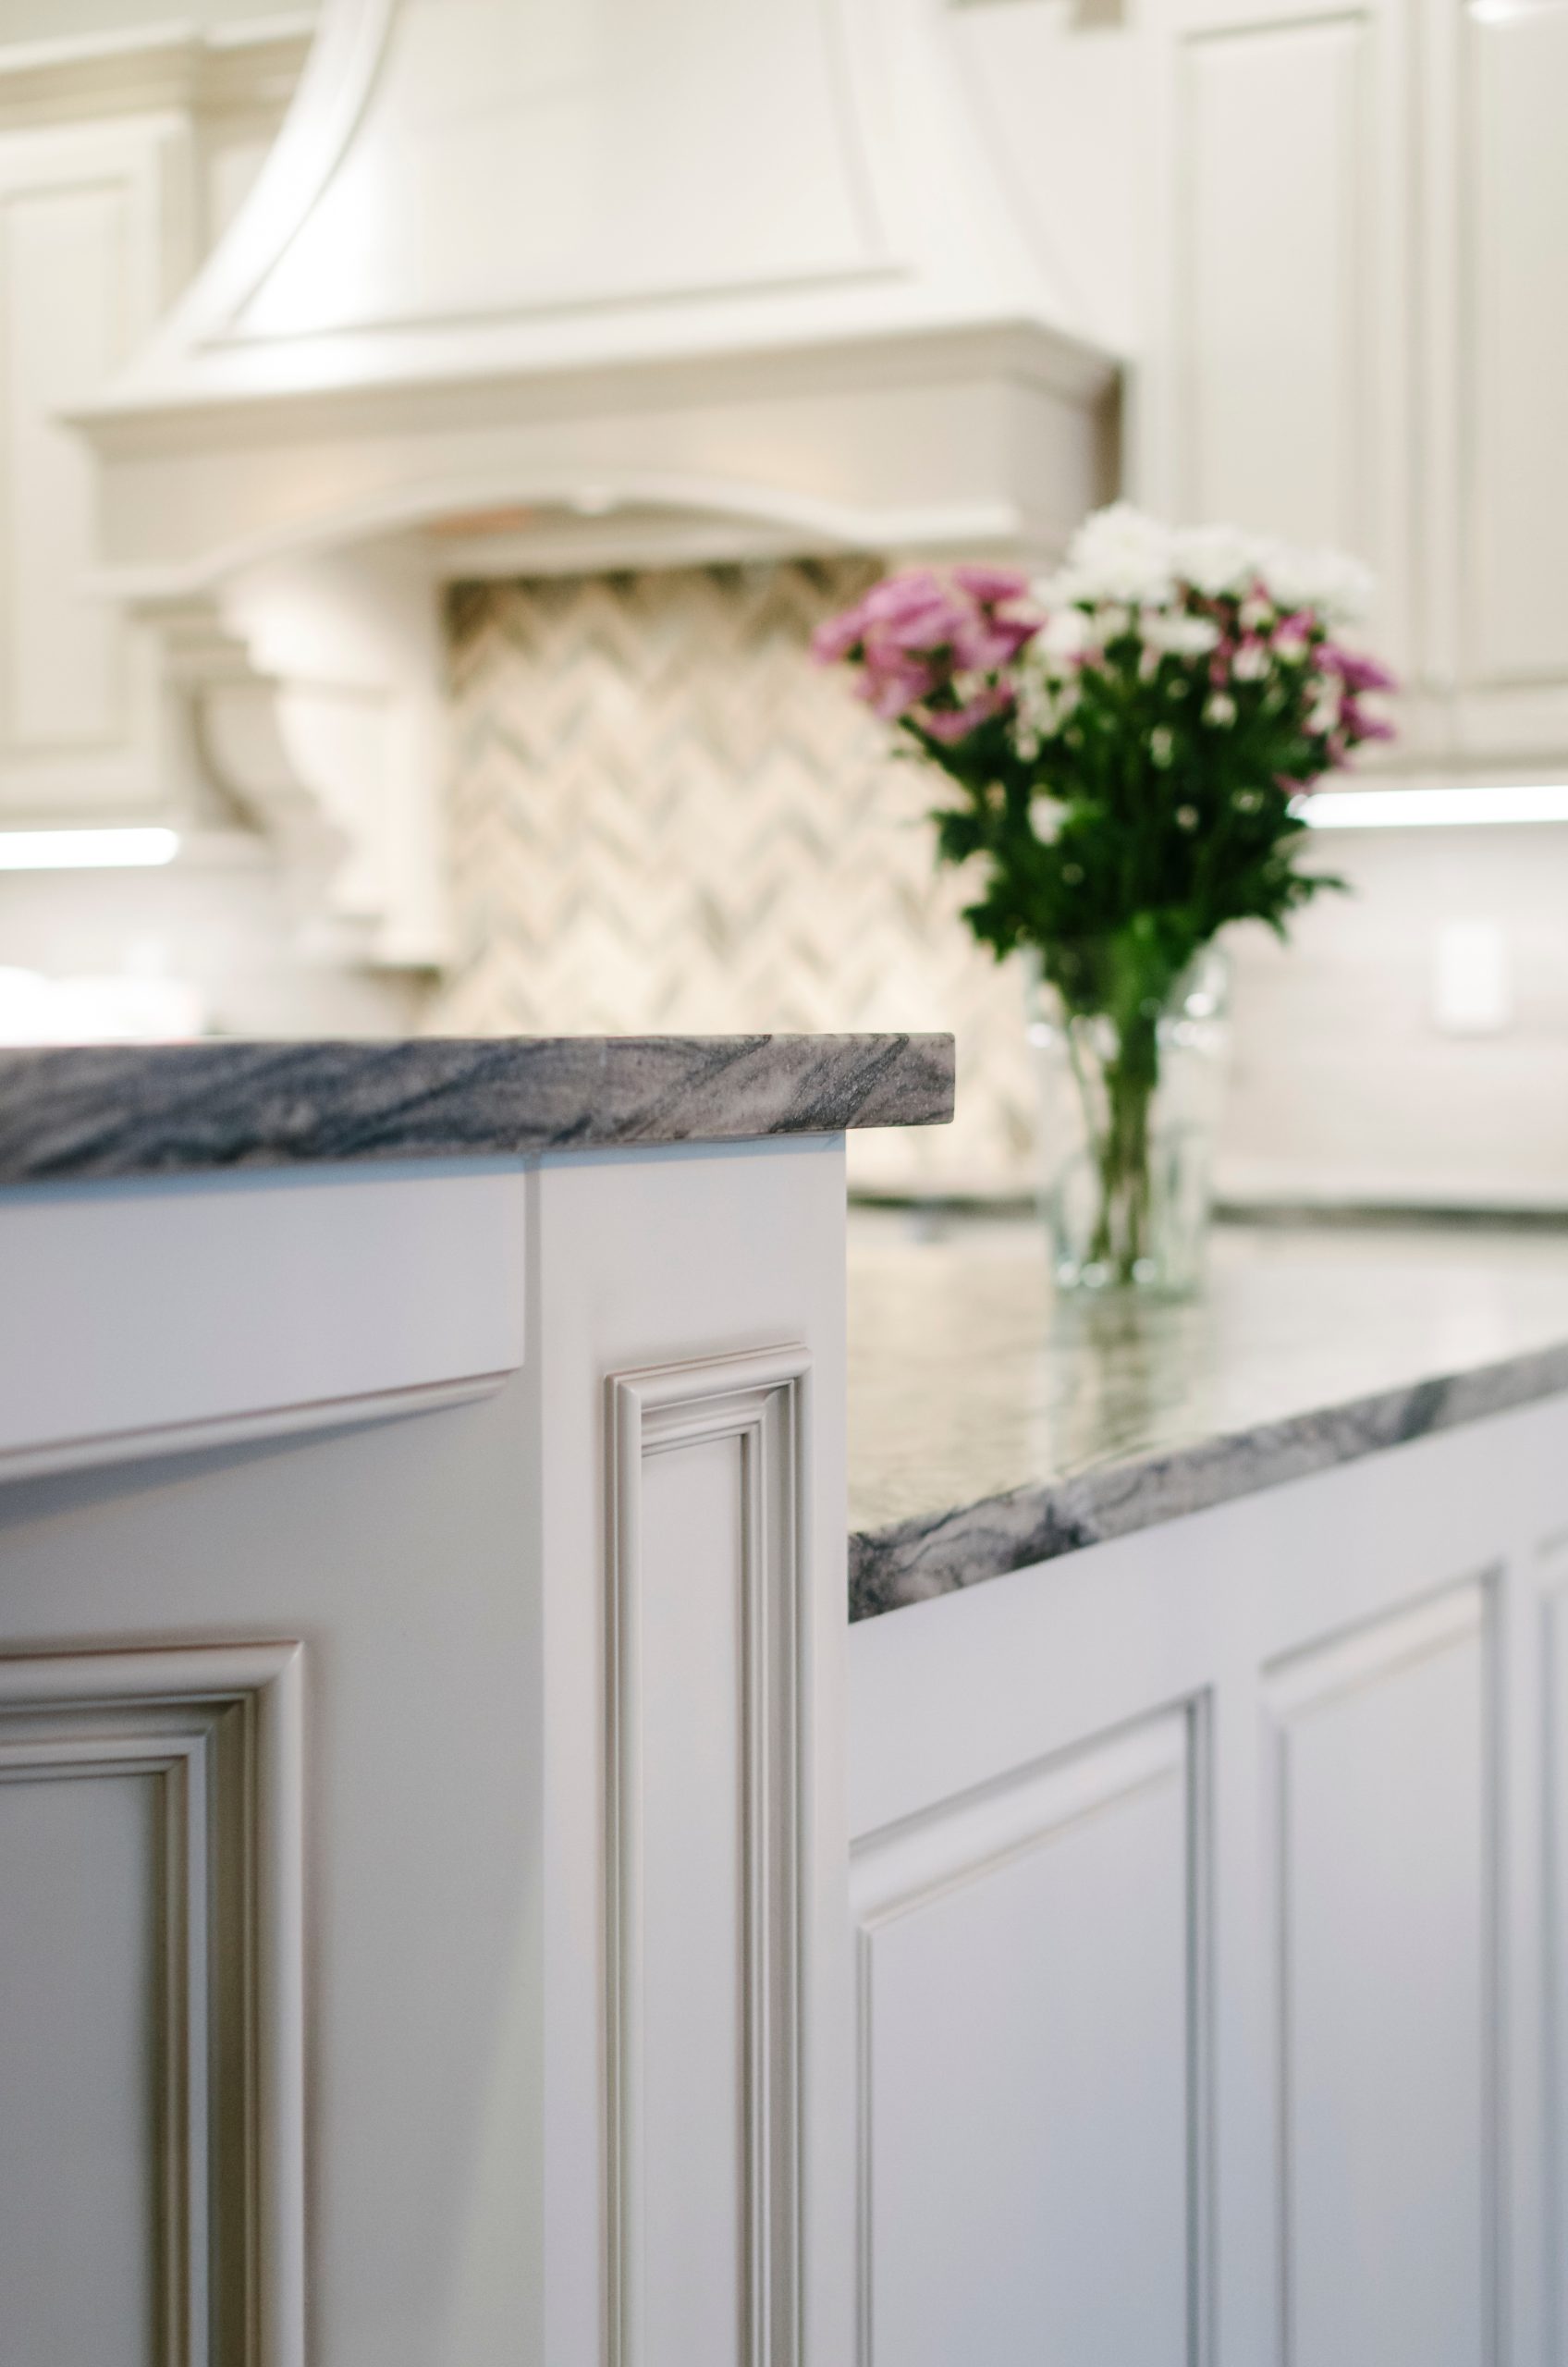 A white kitchen with marble counter tops and flowers.